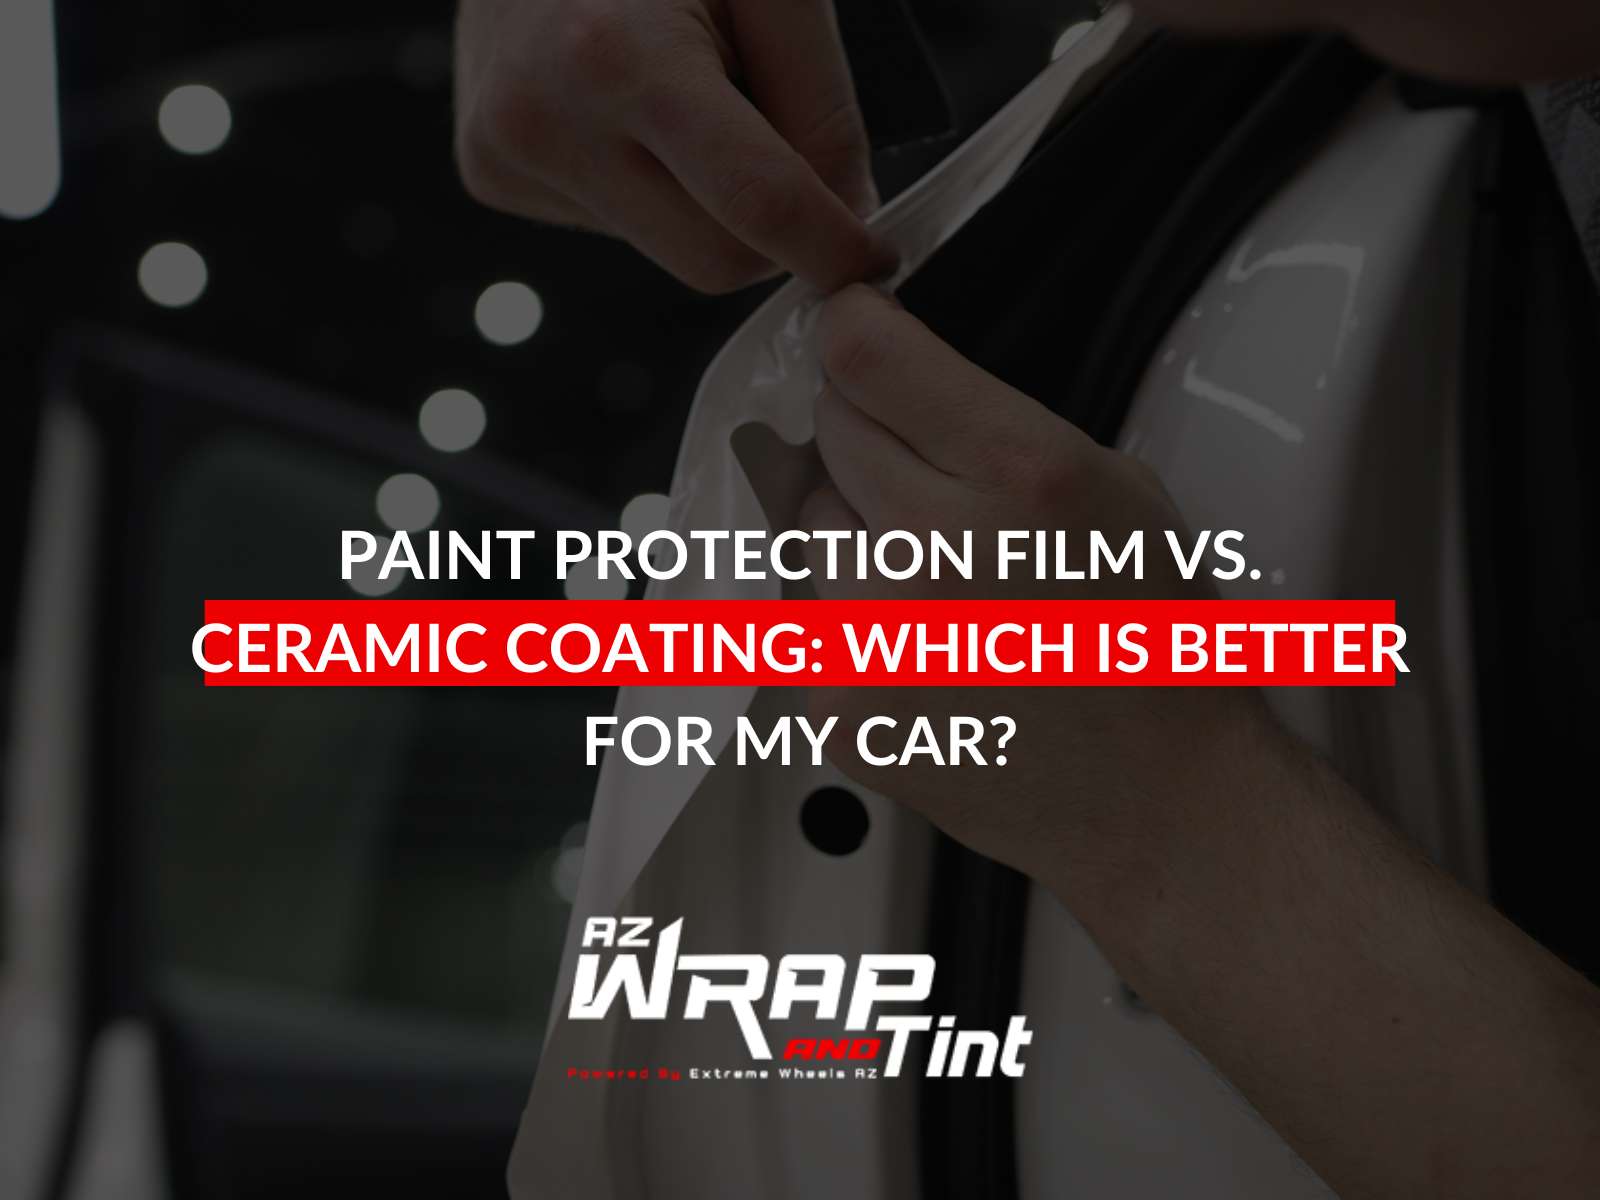 Paint Protection Film vs. Ceramic Coating Which Is Better For My Car